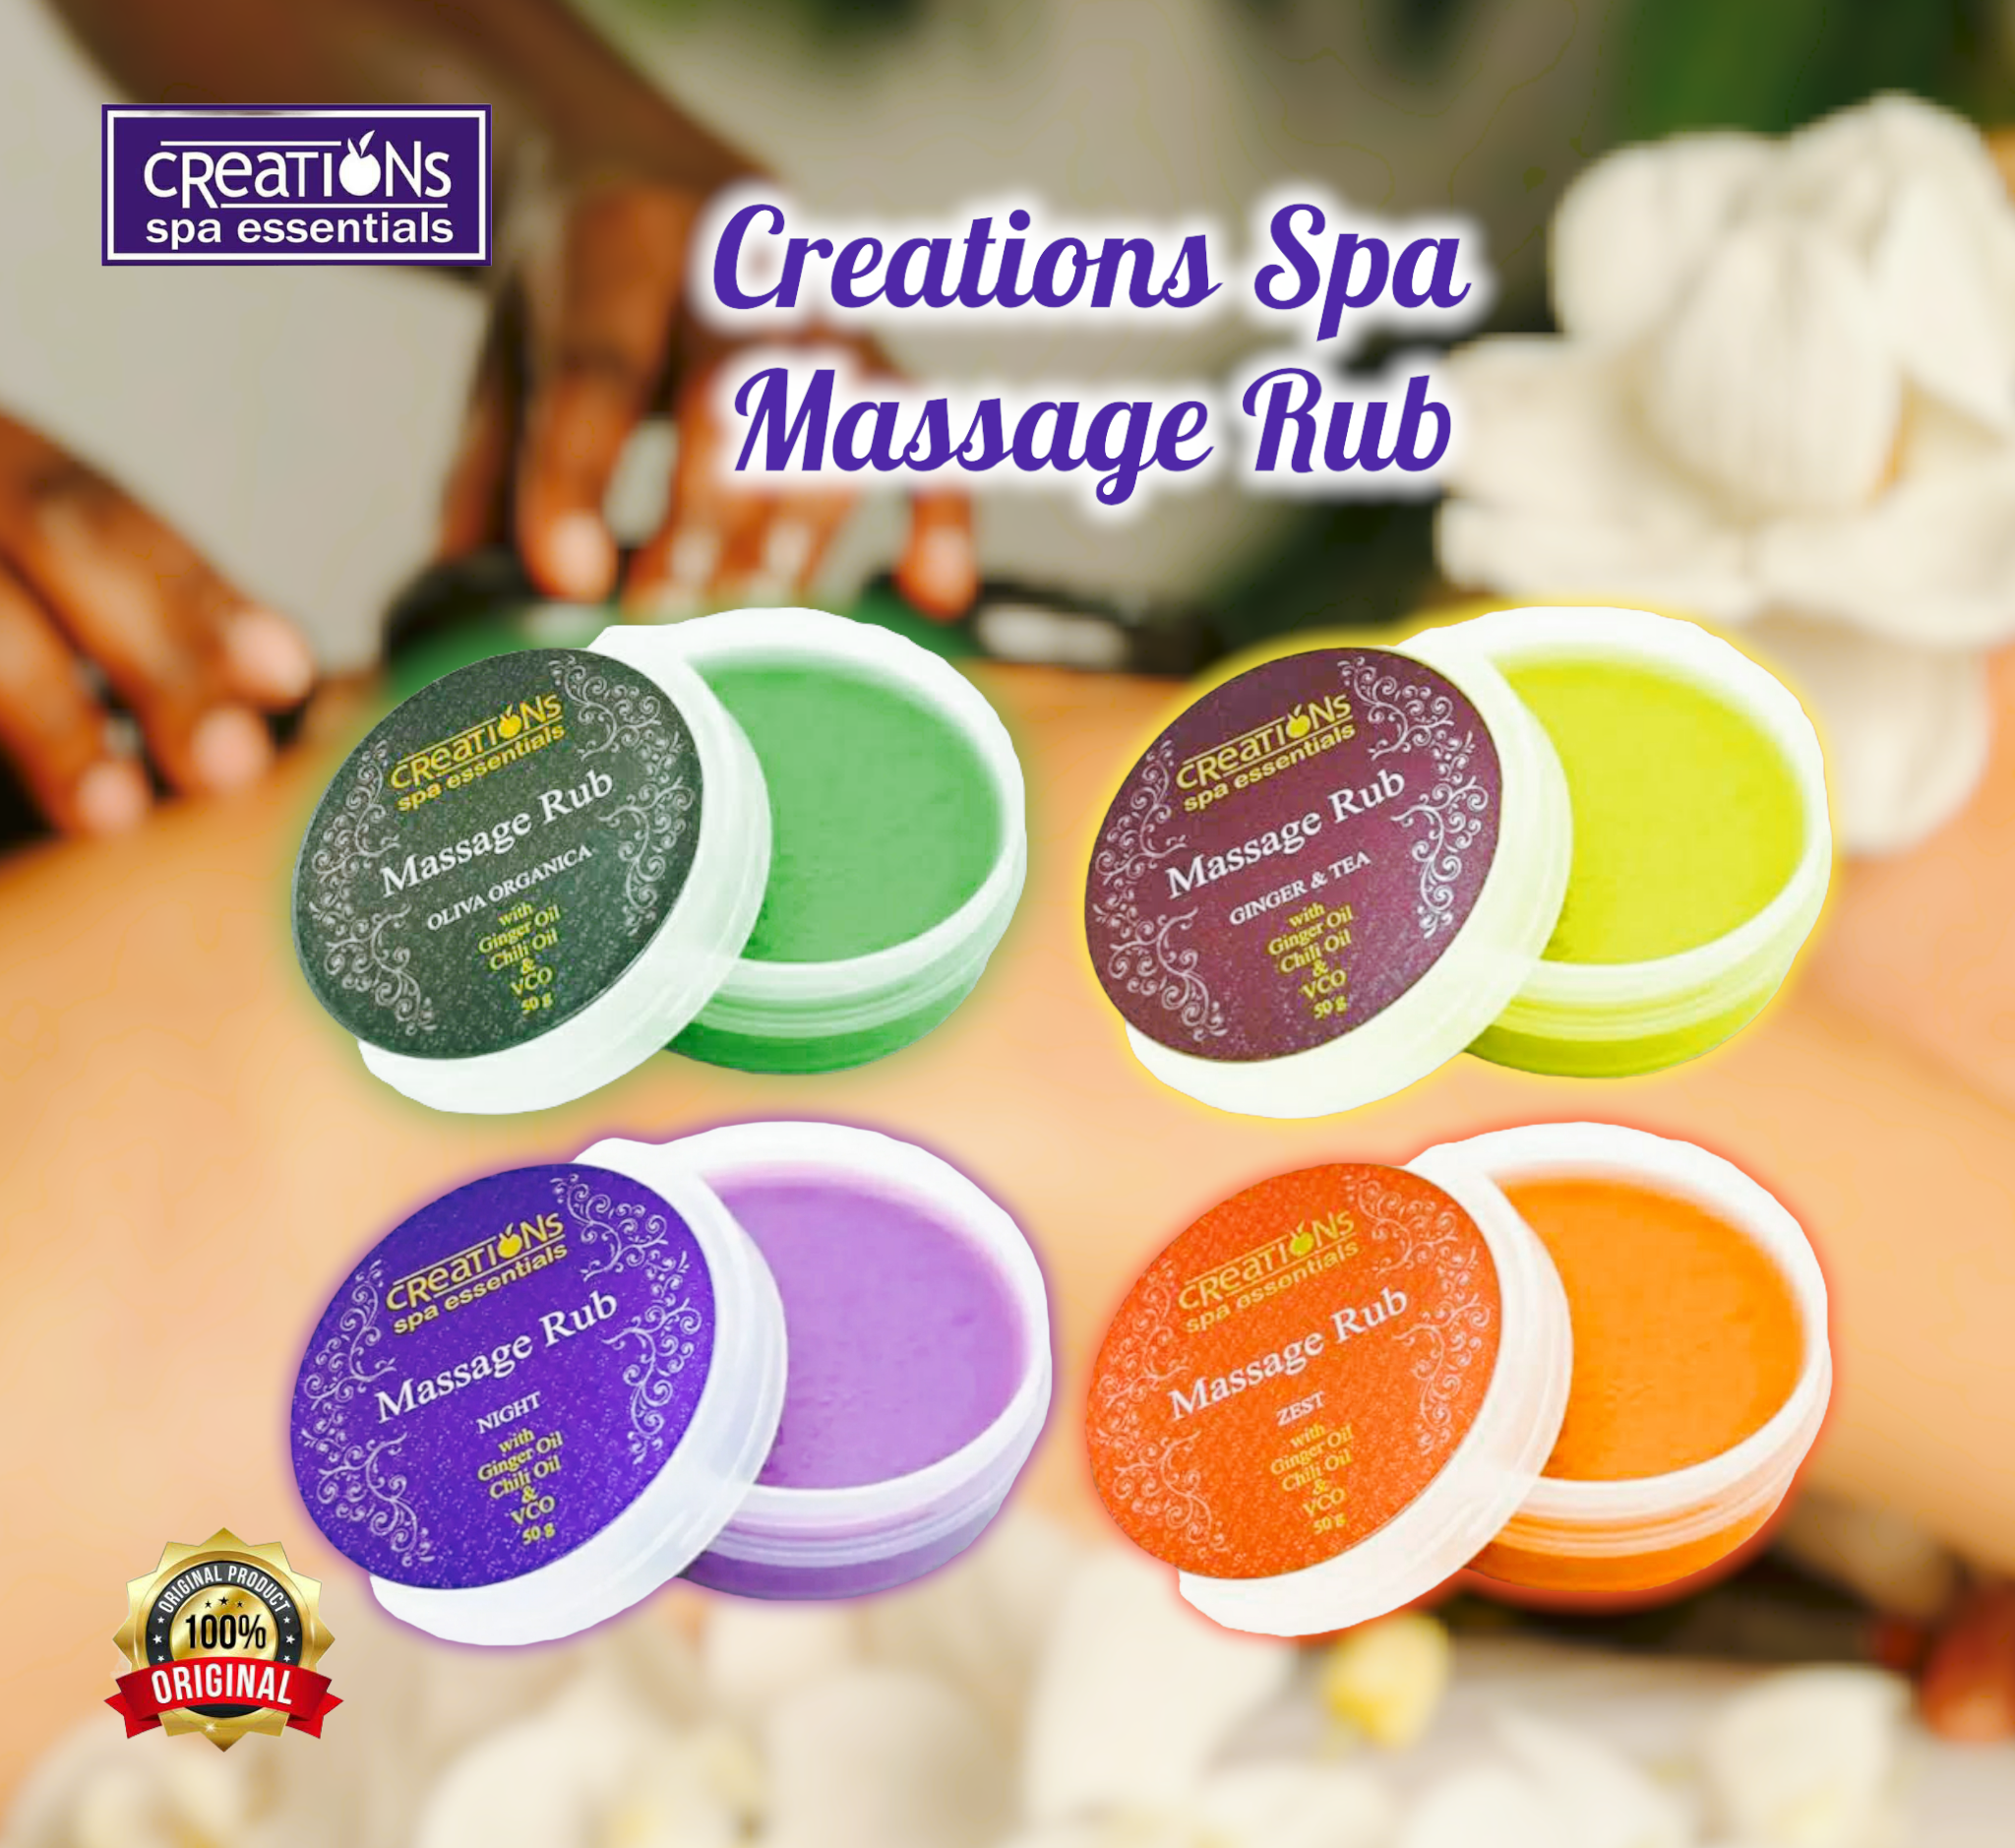 Creations Spa Essentials Pain Relief Rub